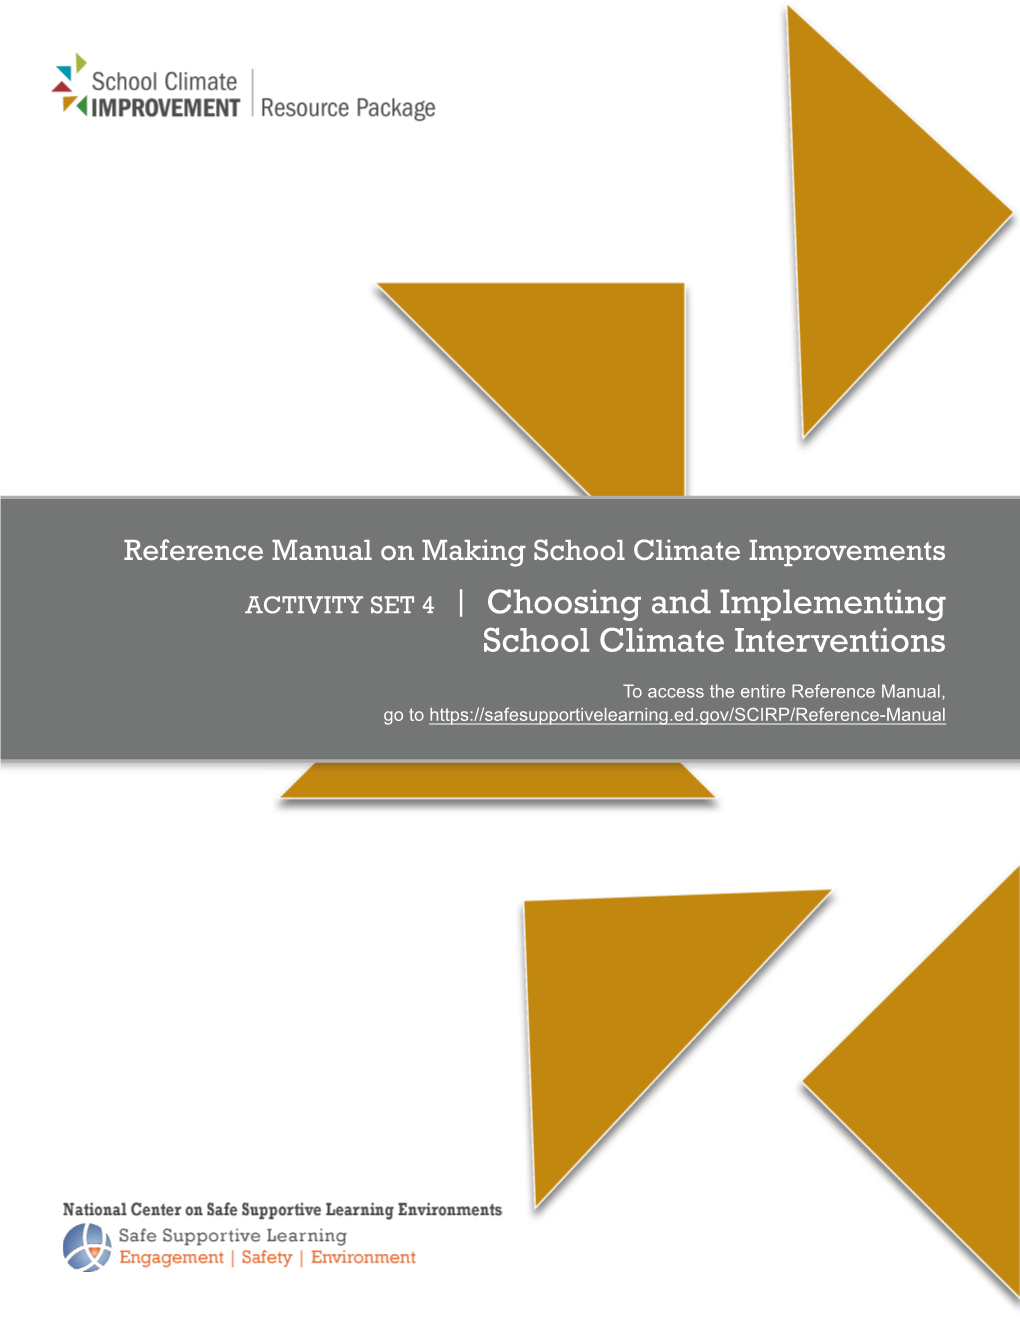 Activity Set 4: Choosing and Implementing School Climate